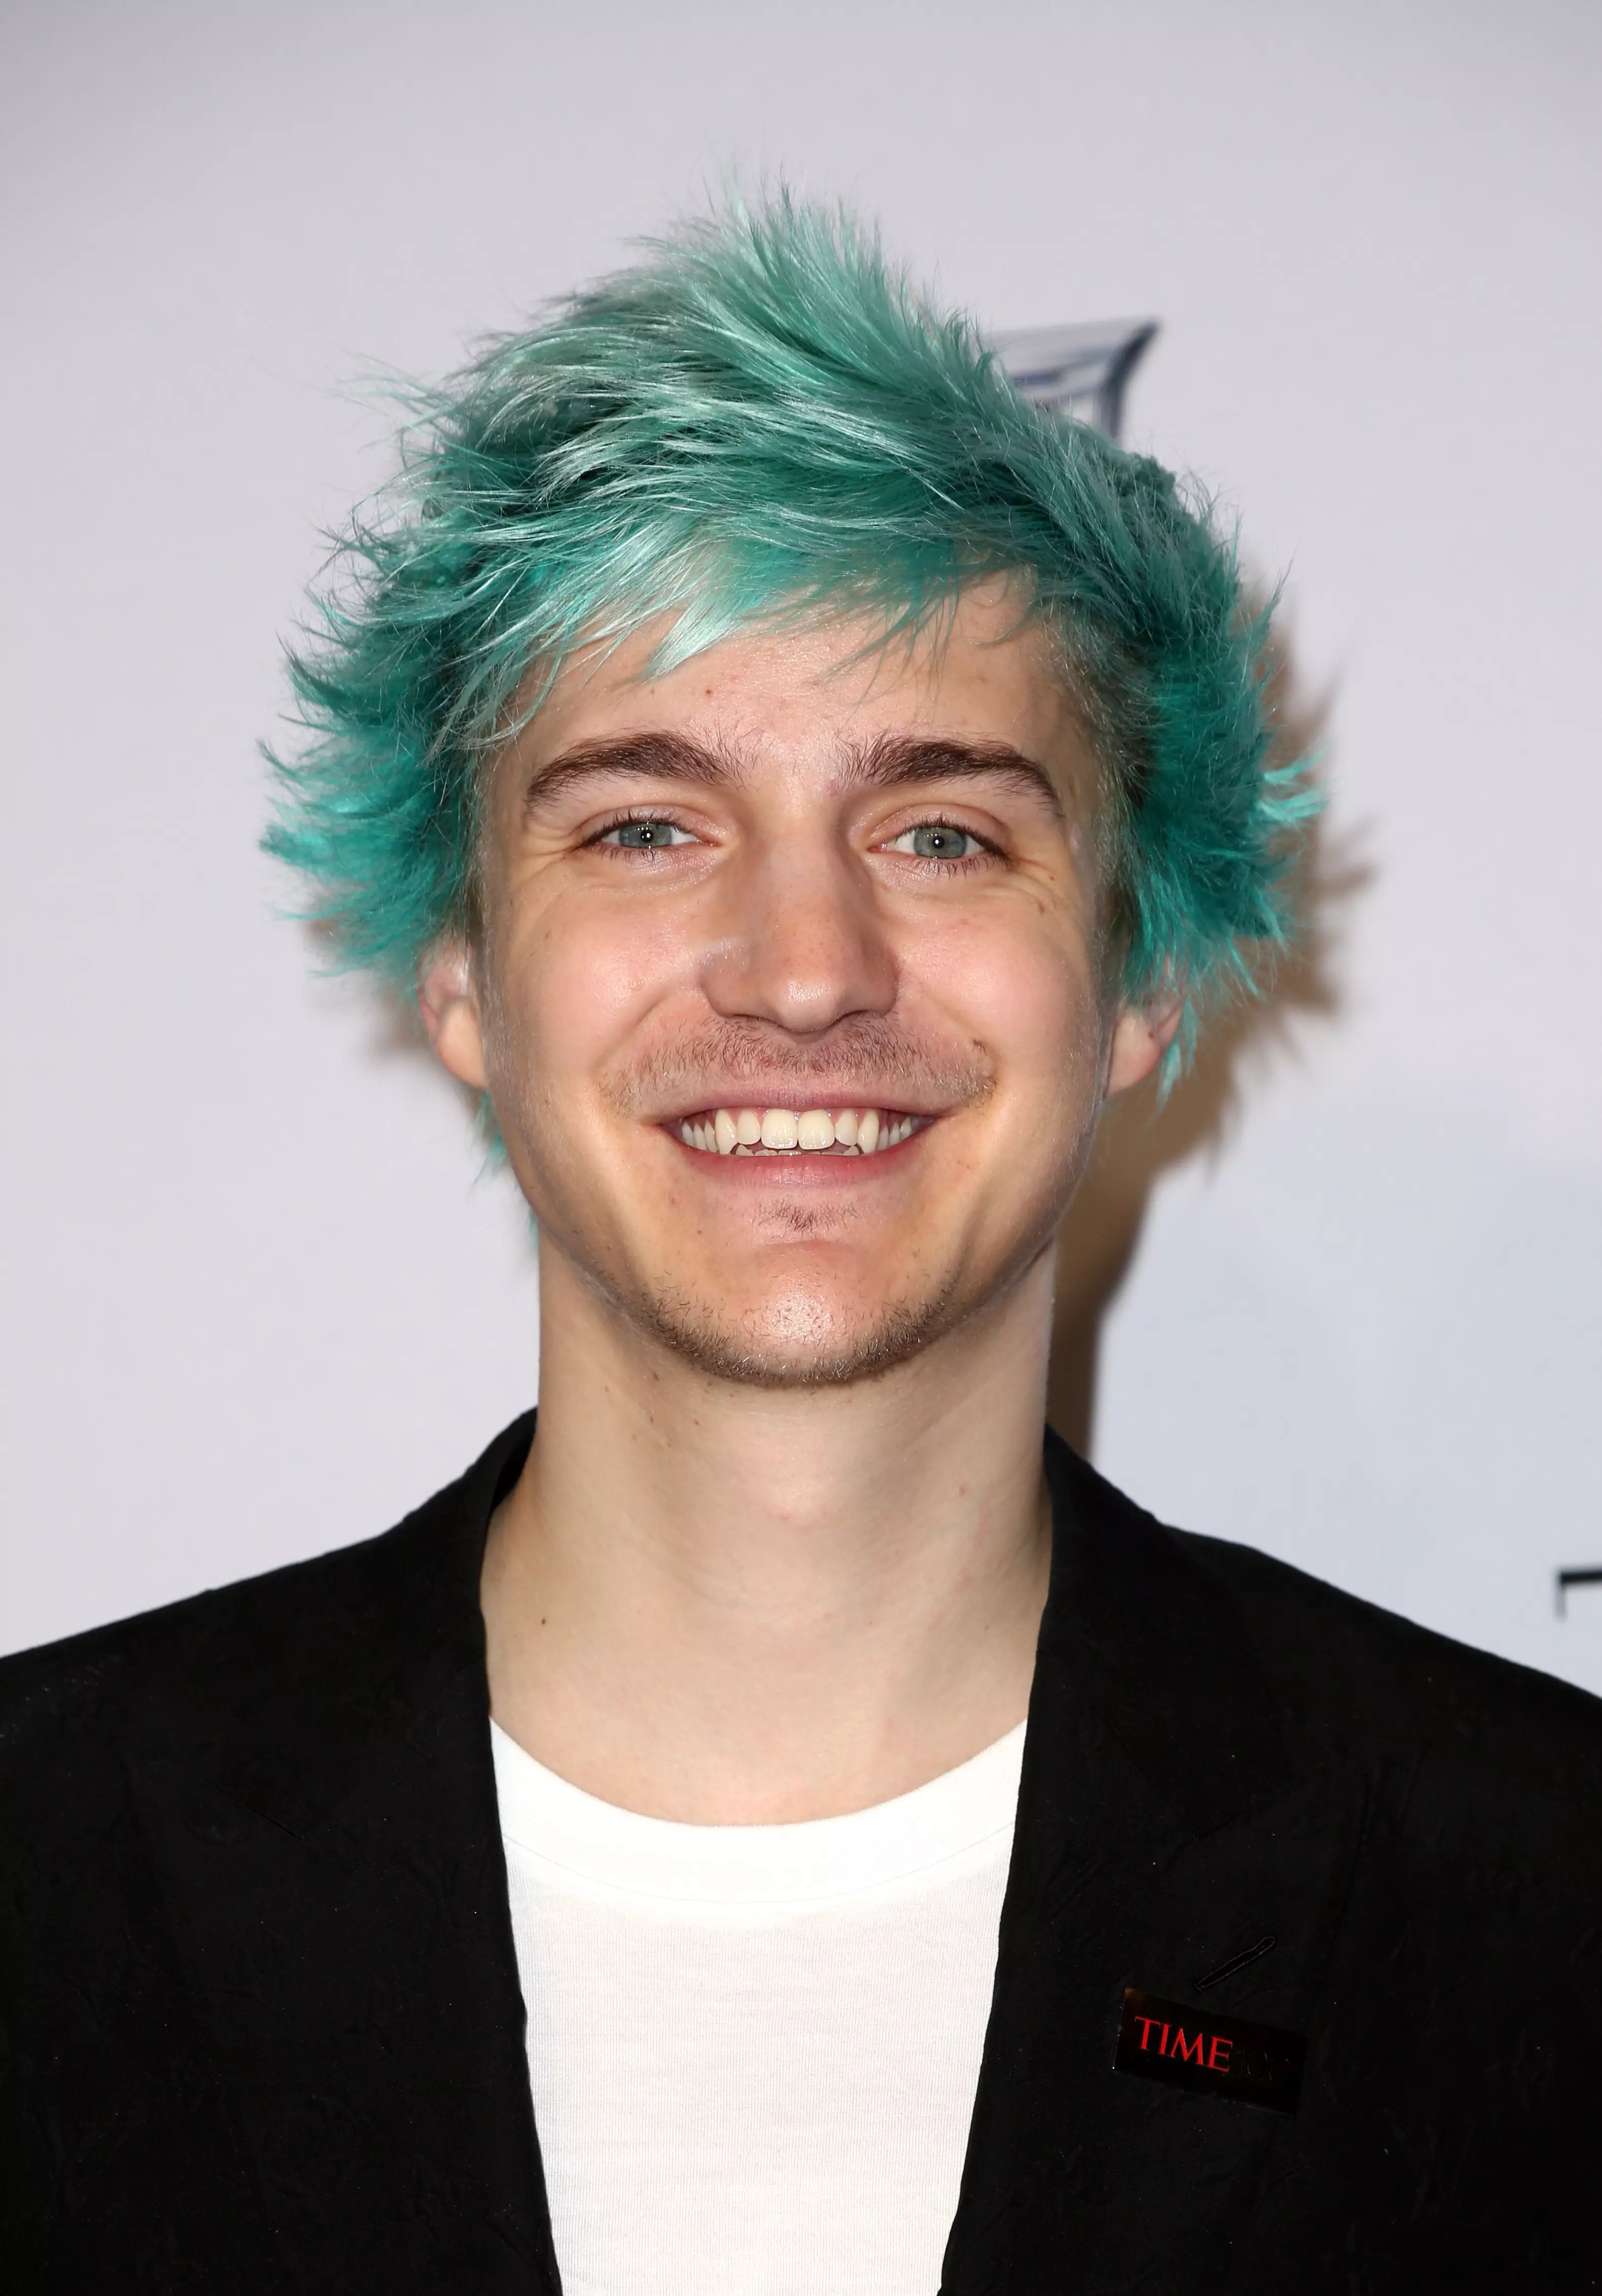 Ninja explained there are several ways to be successful in the gaming community.